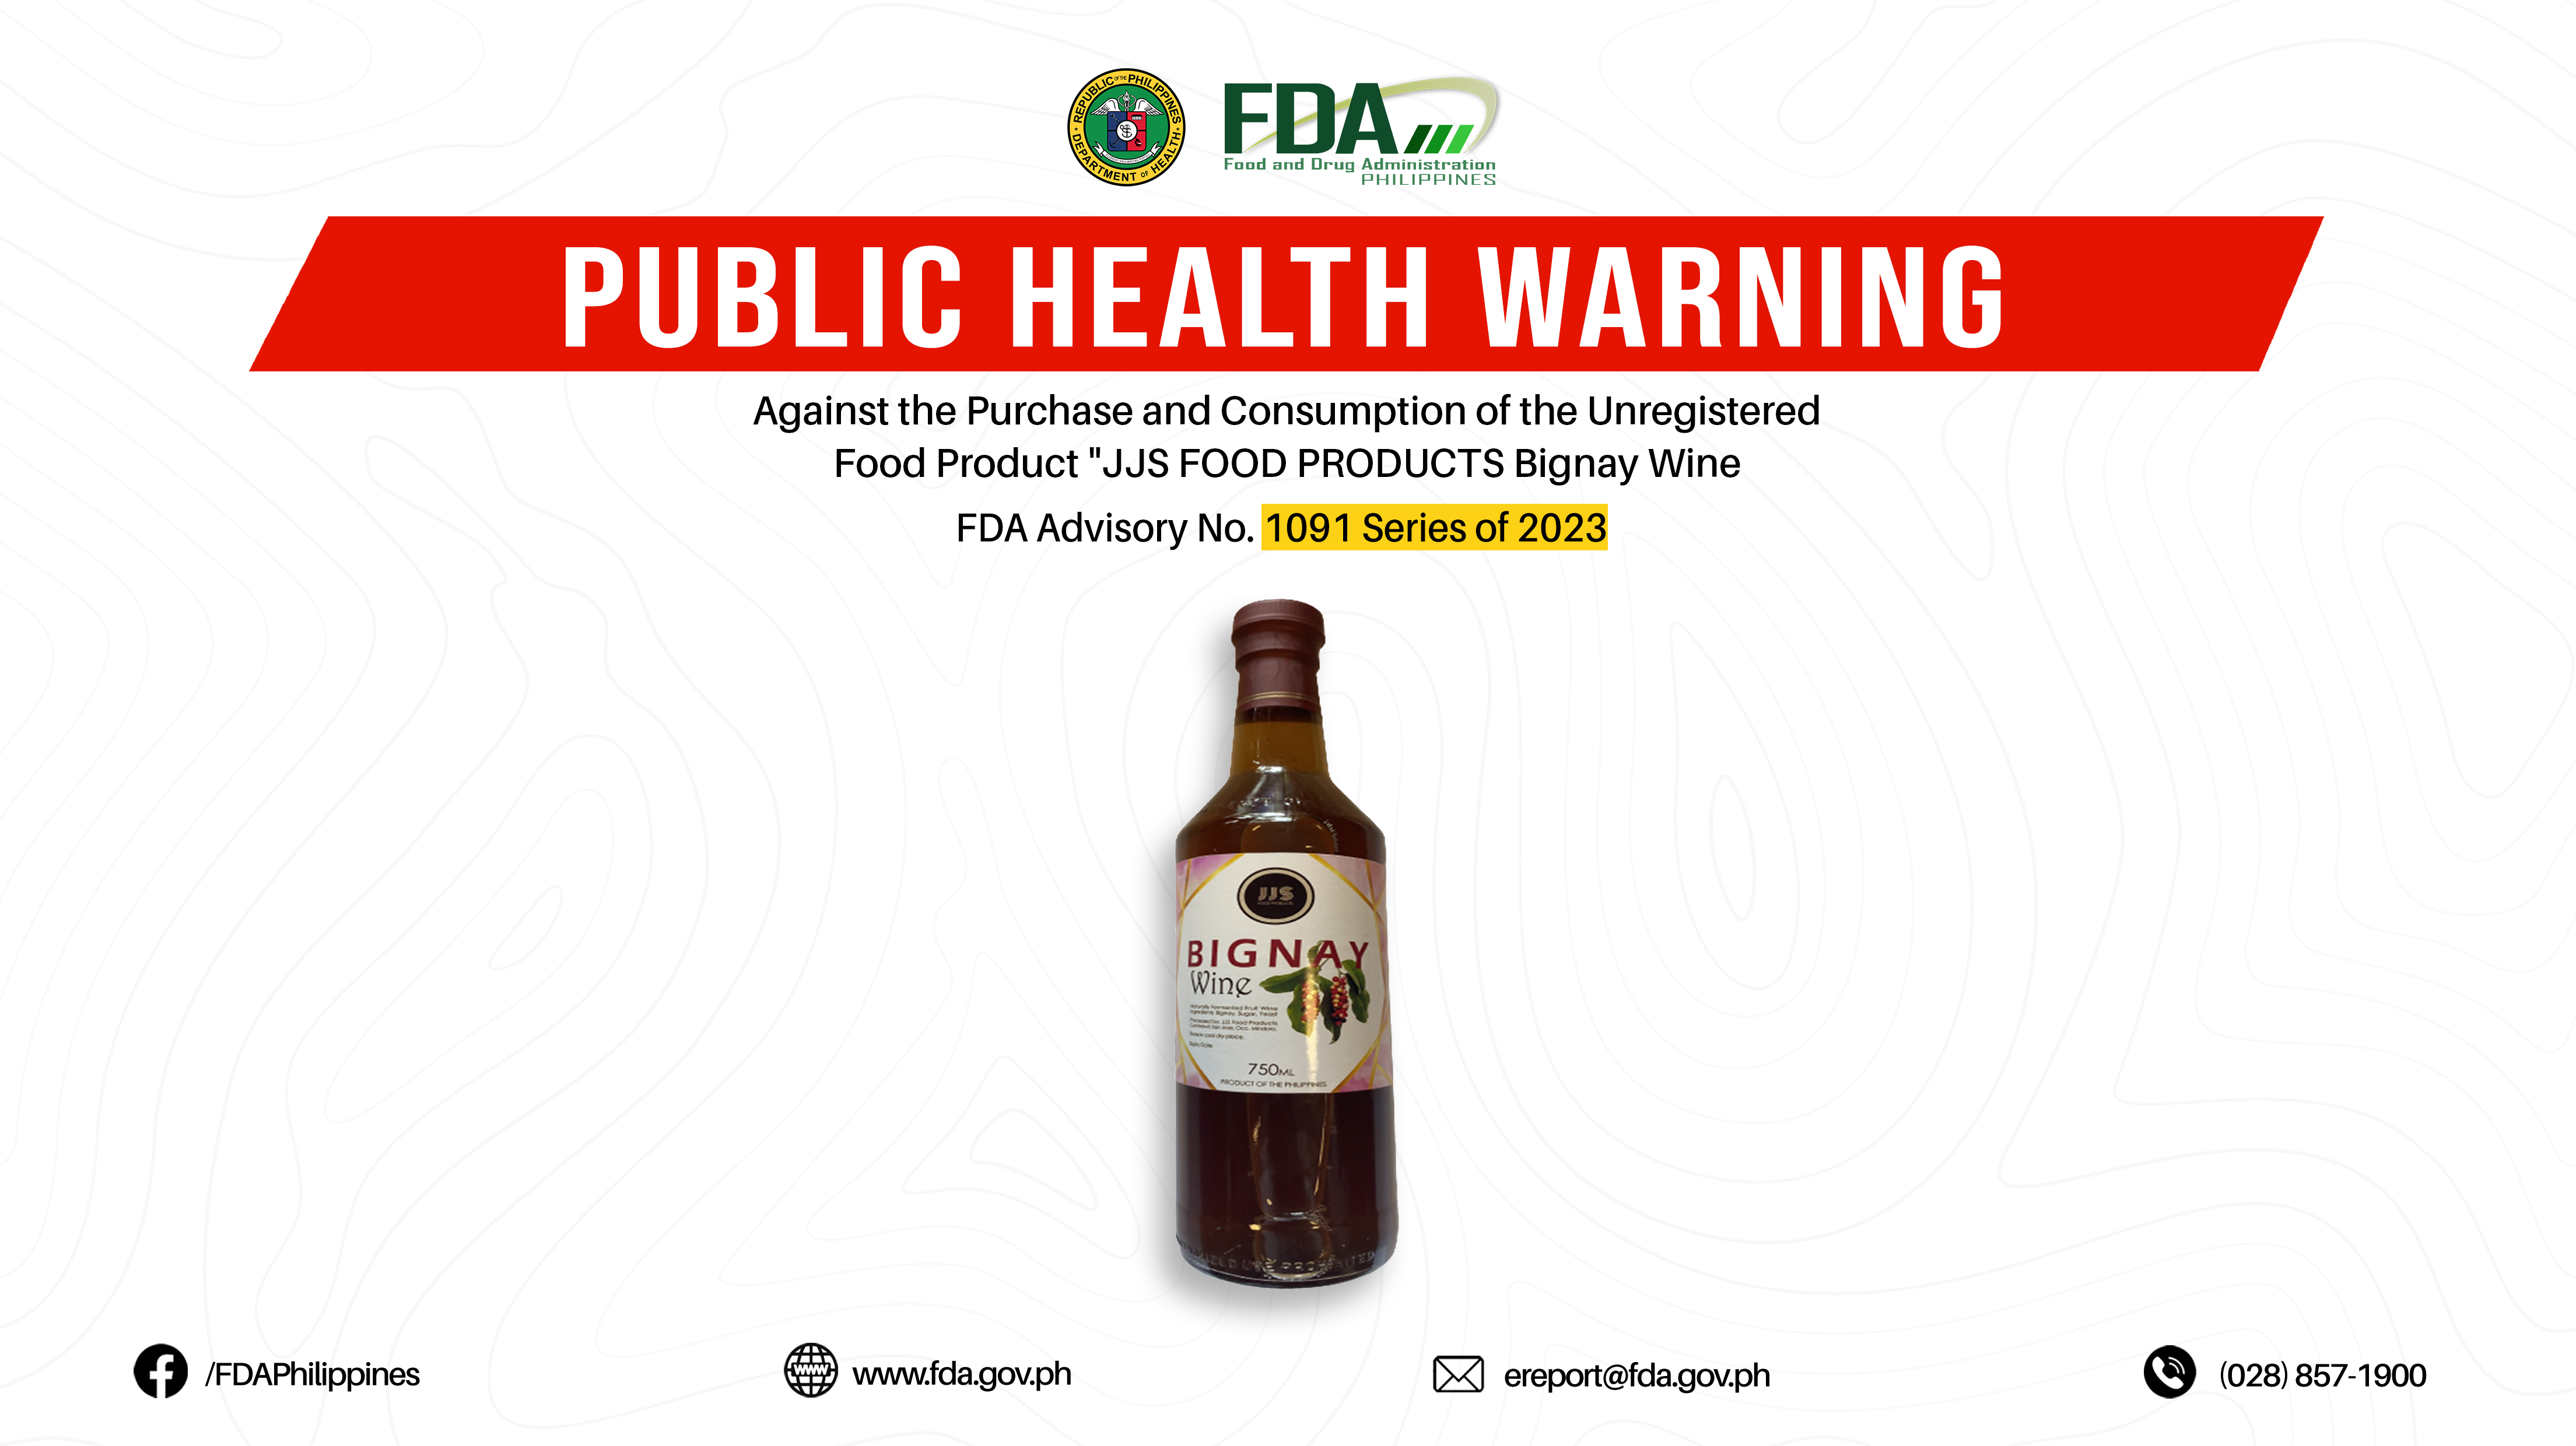 FDA Advisory No.2023-1091 || Public Health Warning Against the Purchase and Consumption of the Unregistered Food Product “JJS FOOD PRODUCTS Bignay Wine”